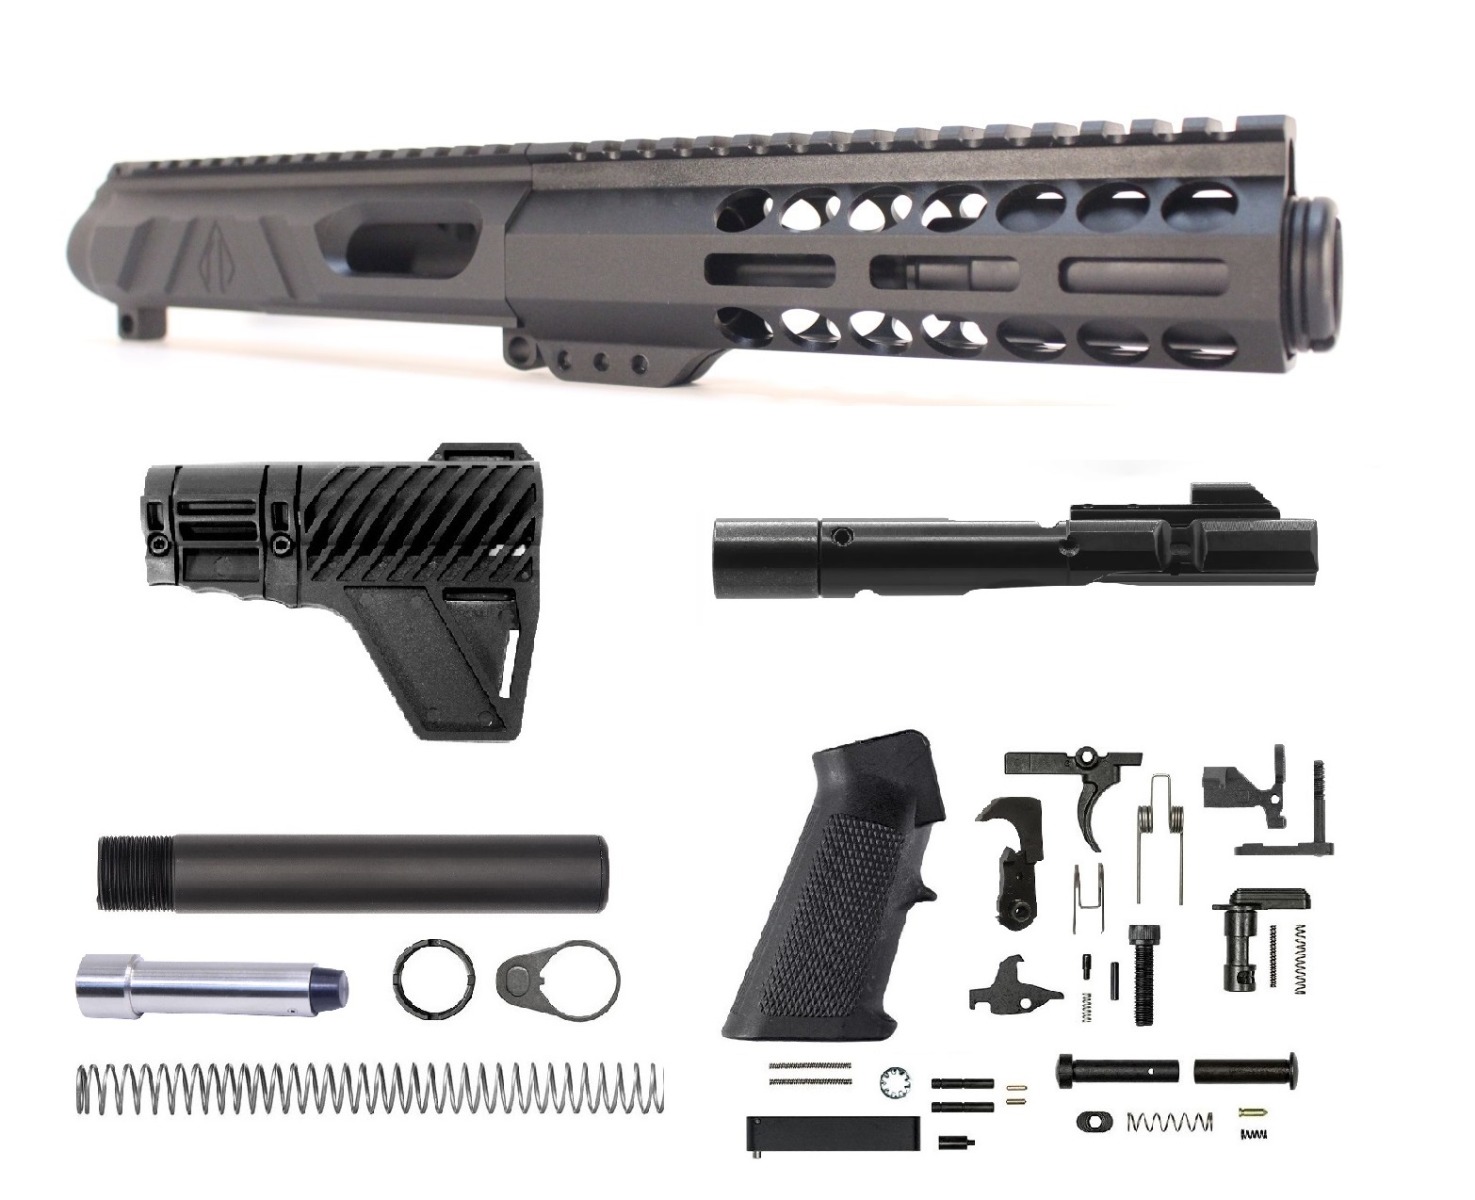 5 inch AR-15 Non Reciprocating Side Charging 45 ACP Pistol Caliber Melonite Upper w/CAN Complete Kit | Pro2A Tactical